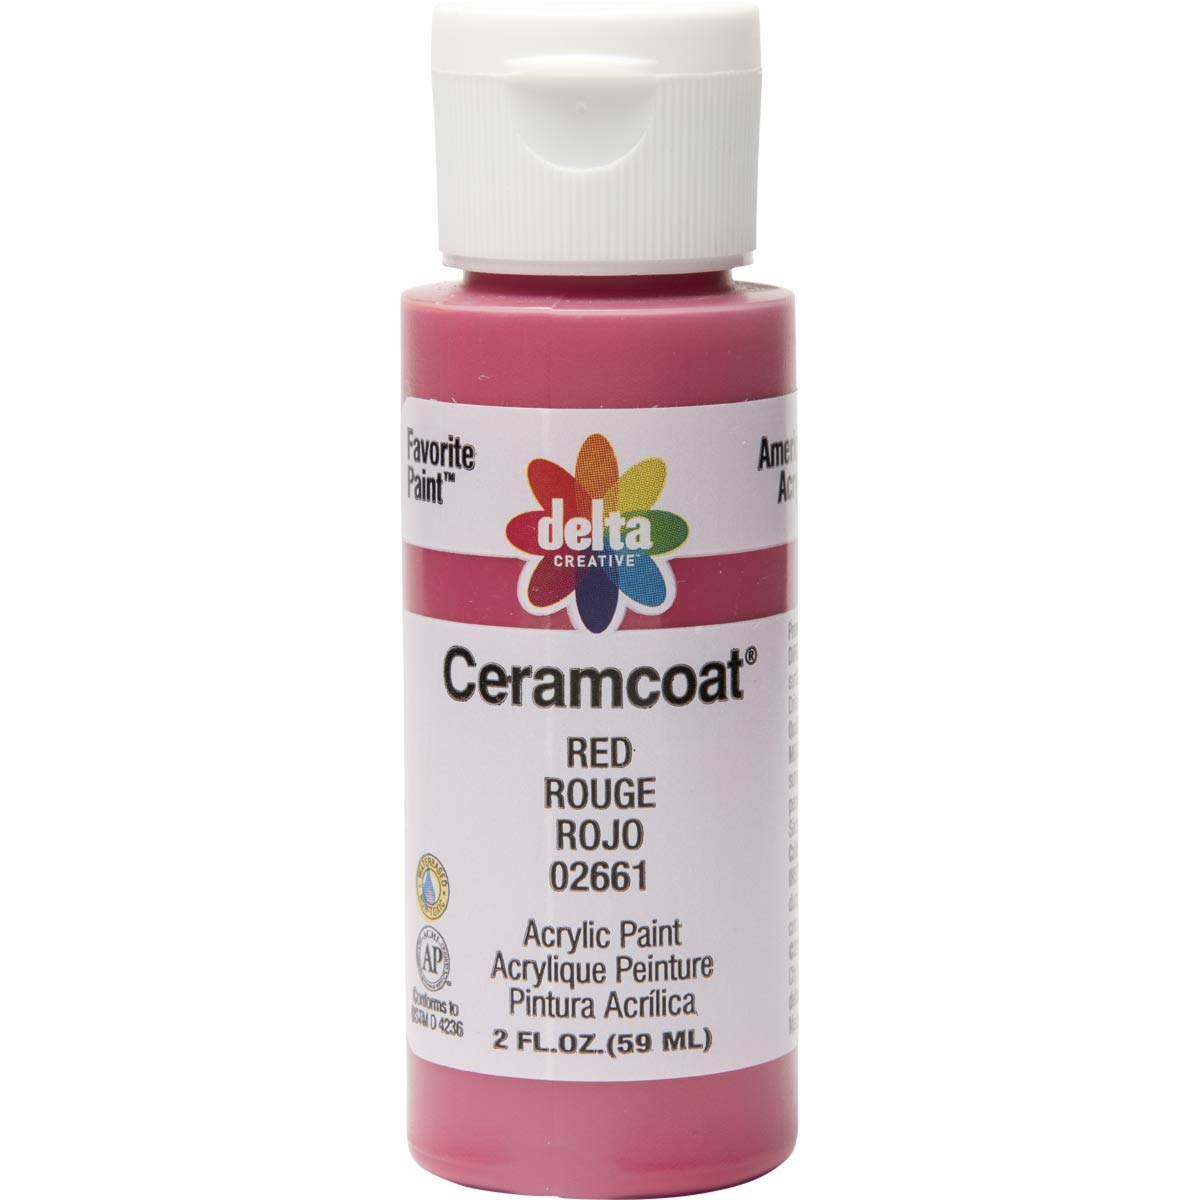 Delta Ceramcoat Acrylic Paint - Red, 2 oz. - 026610202W